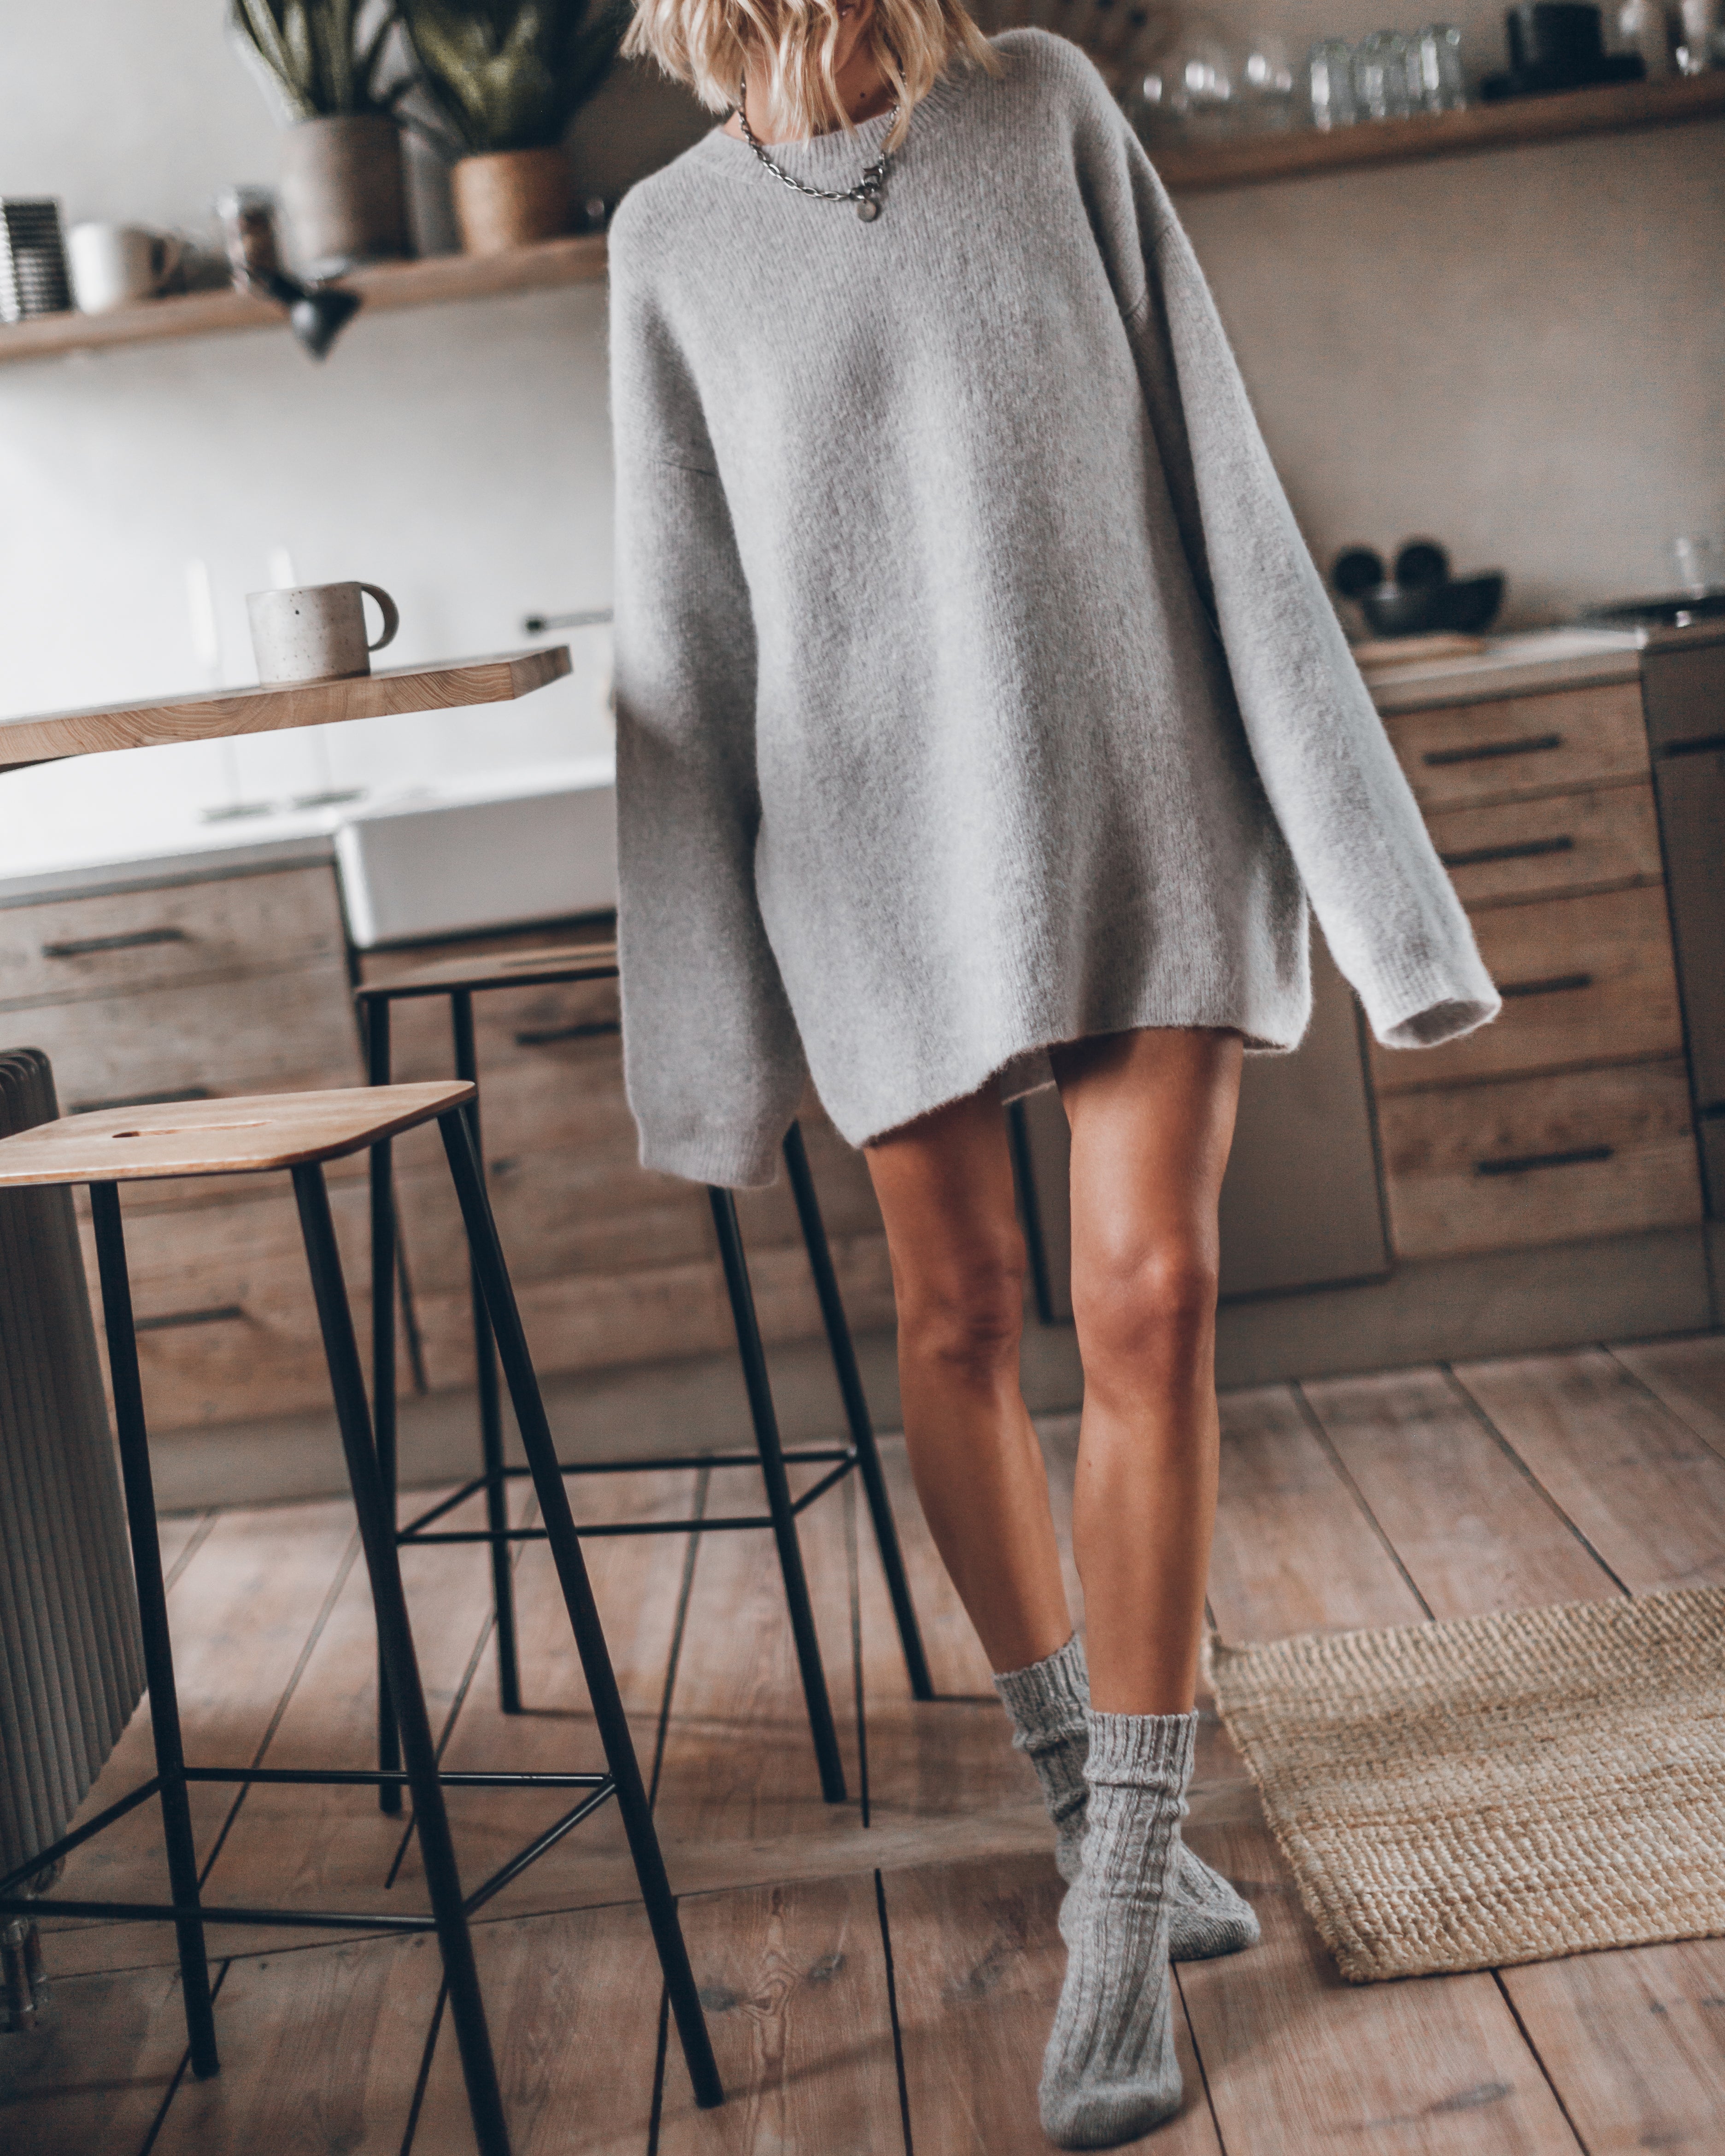 The Grey Oversized Knitted Sweater